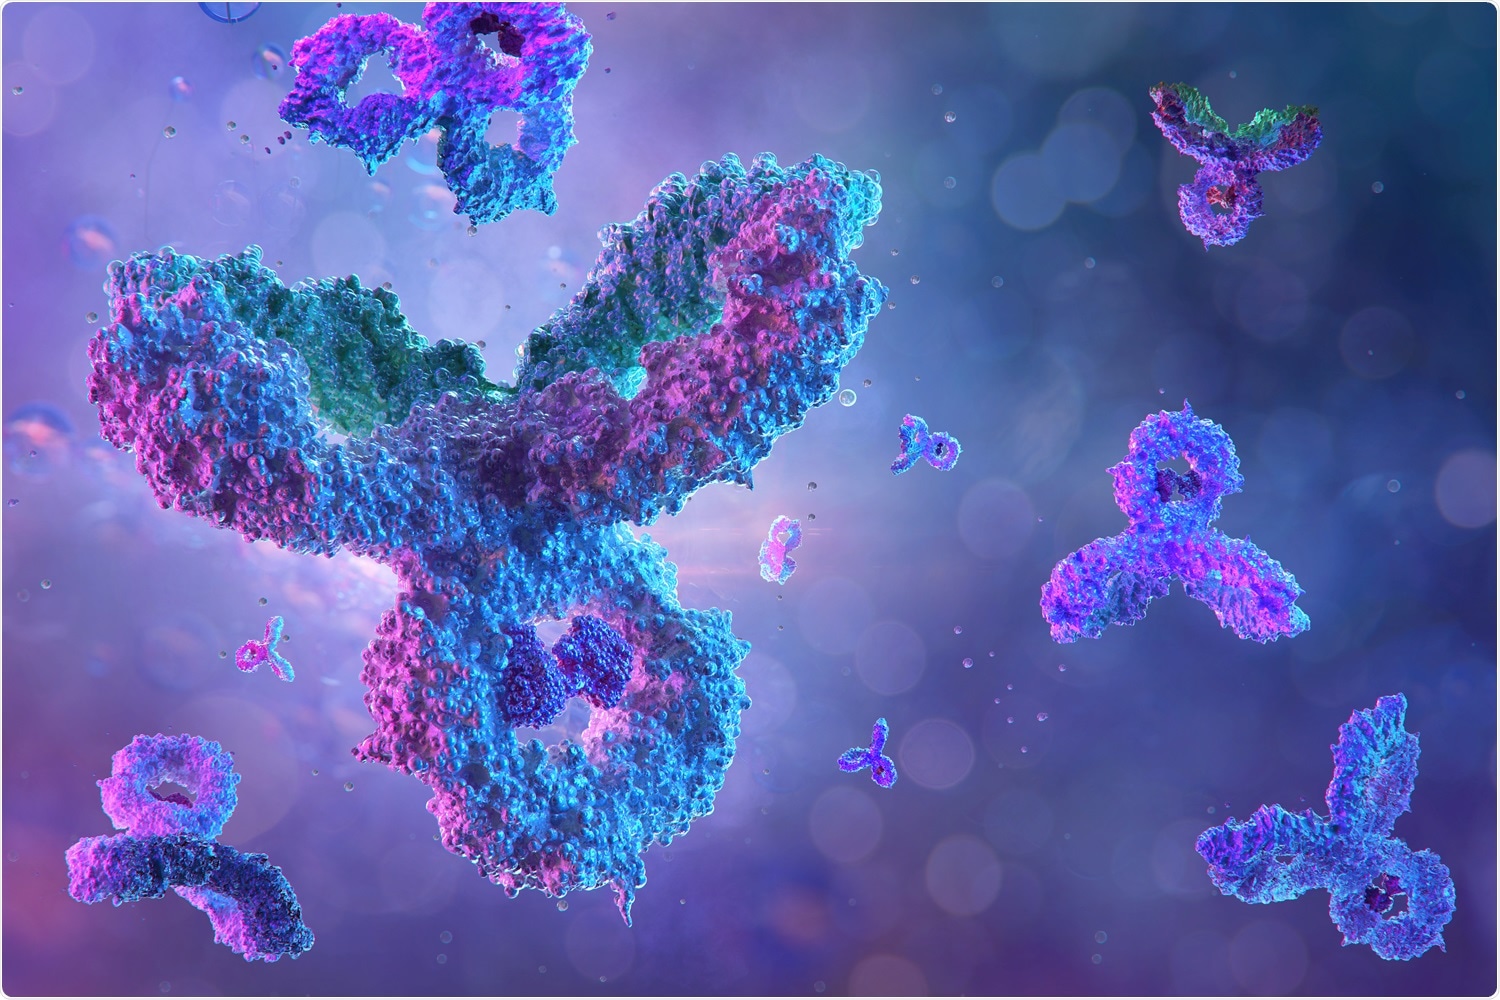 Study: Neutralizing Antibodies to SARS-CoV-2 Selected from a Human Antibody Library Constructed Decades Ago. Image Credit: Corona Borealis Studio / Shutterstock